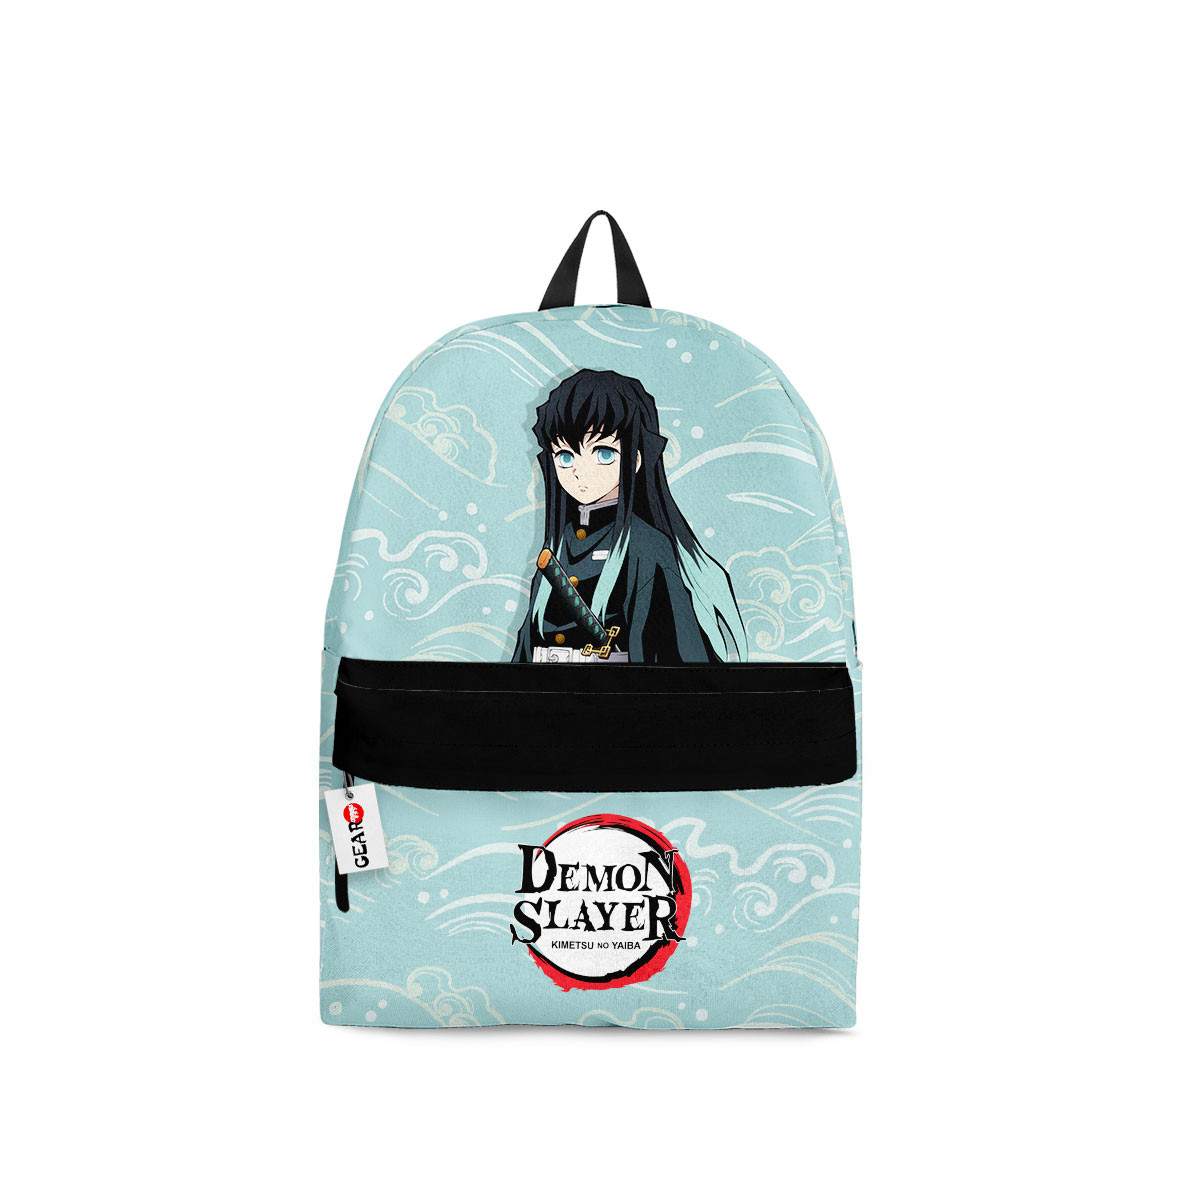 Latest Anime style products 109